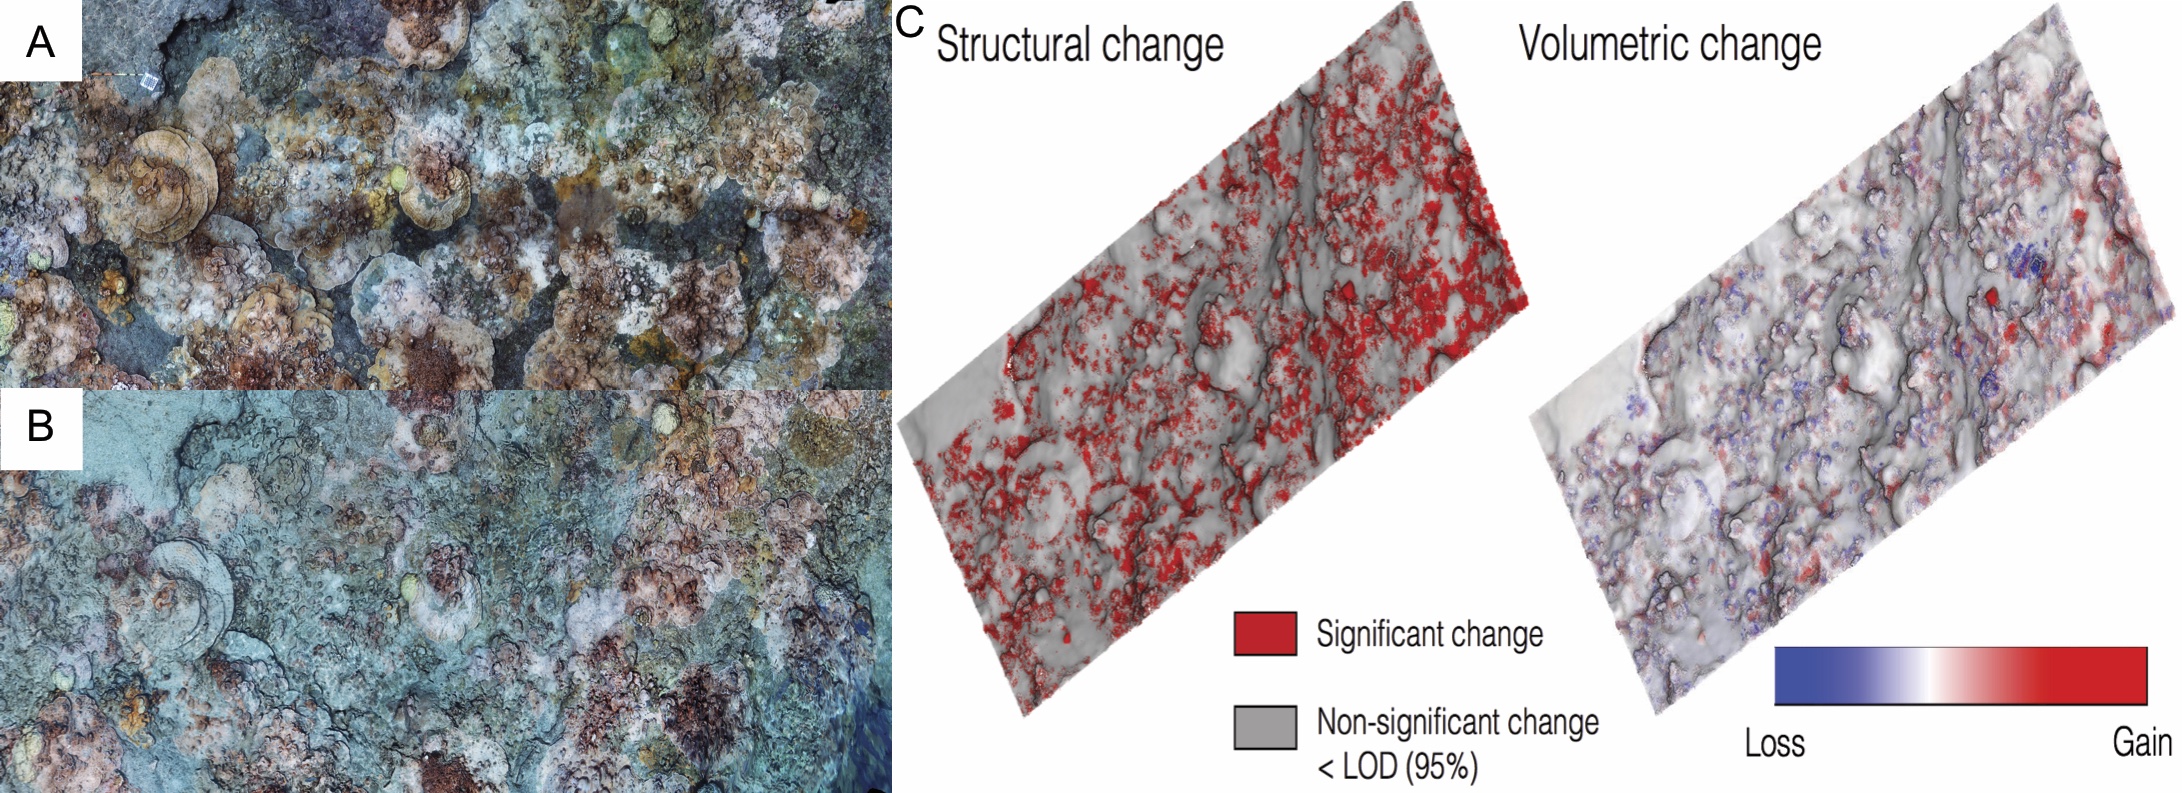 Quantifying impacts of disturbance to coral community structure and 3D habitat complexity